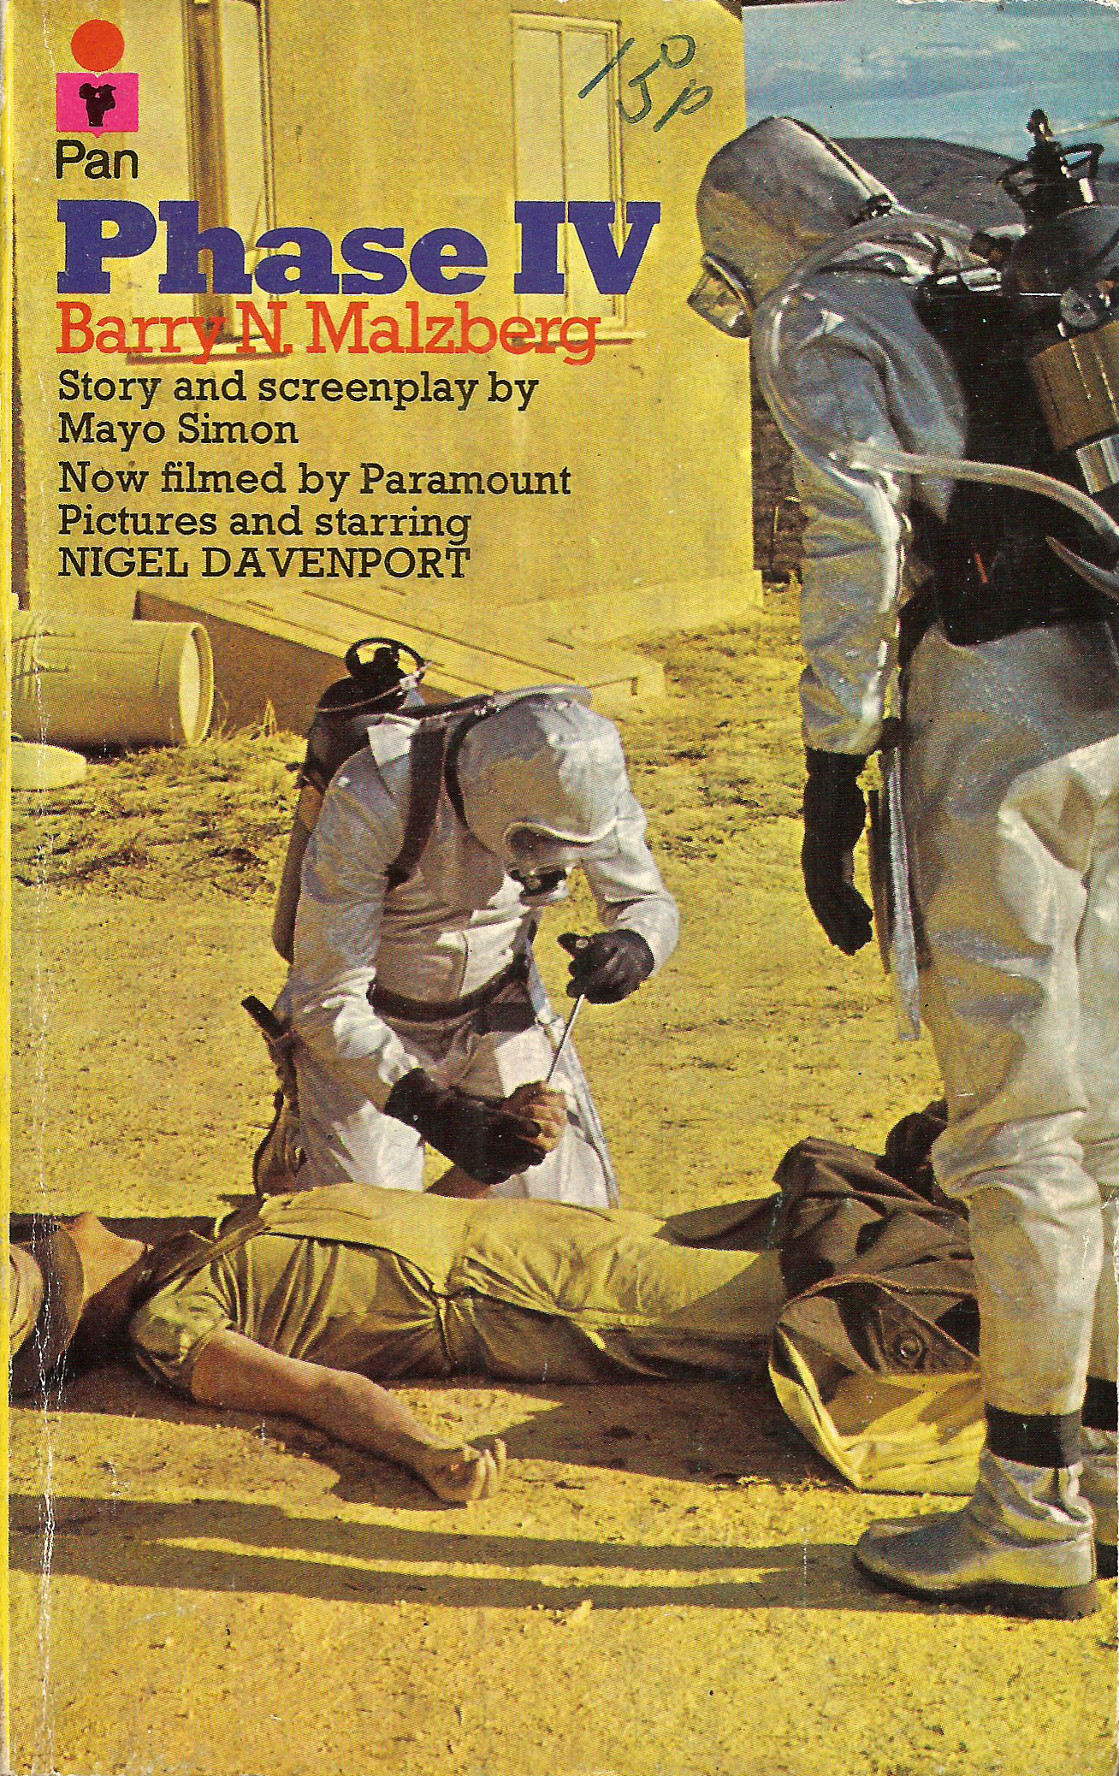 Phase IV, by Barry N. Malzberg, from the original screenplay by Mayo Simon (Pan,